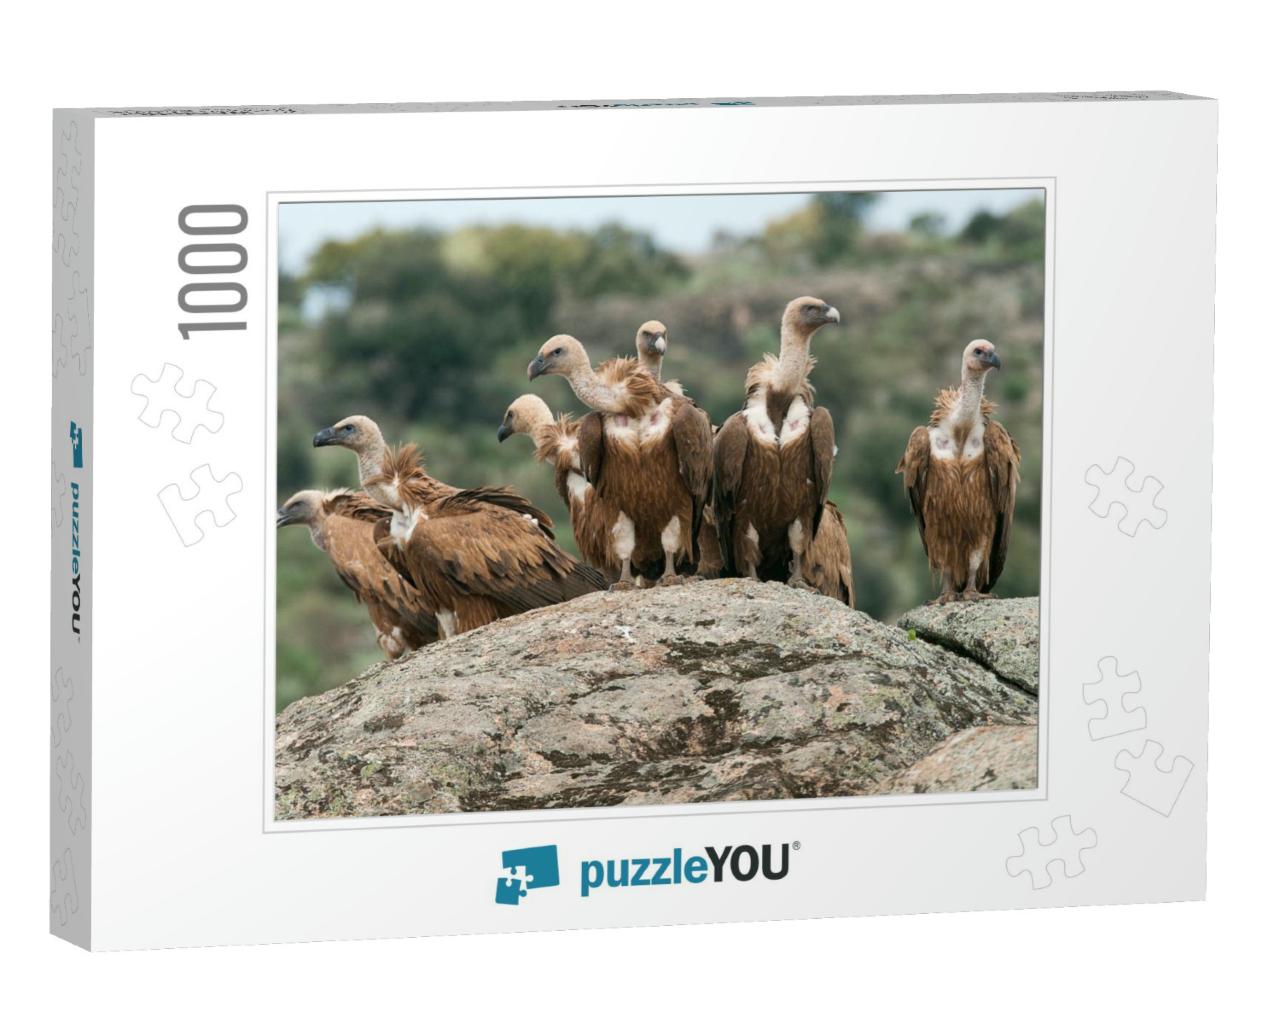 Griffon Vulture Gyps Fulvus Group Perched on Rocks... Jigsaw Puzzle with 1000 pieces